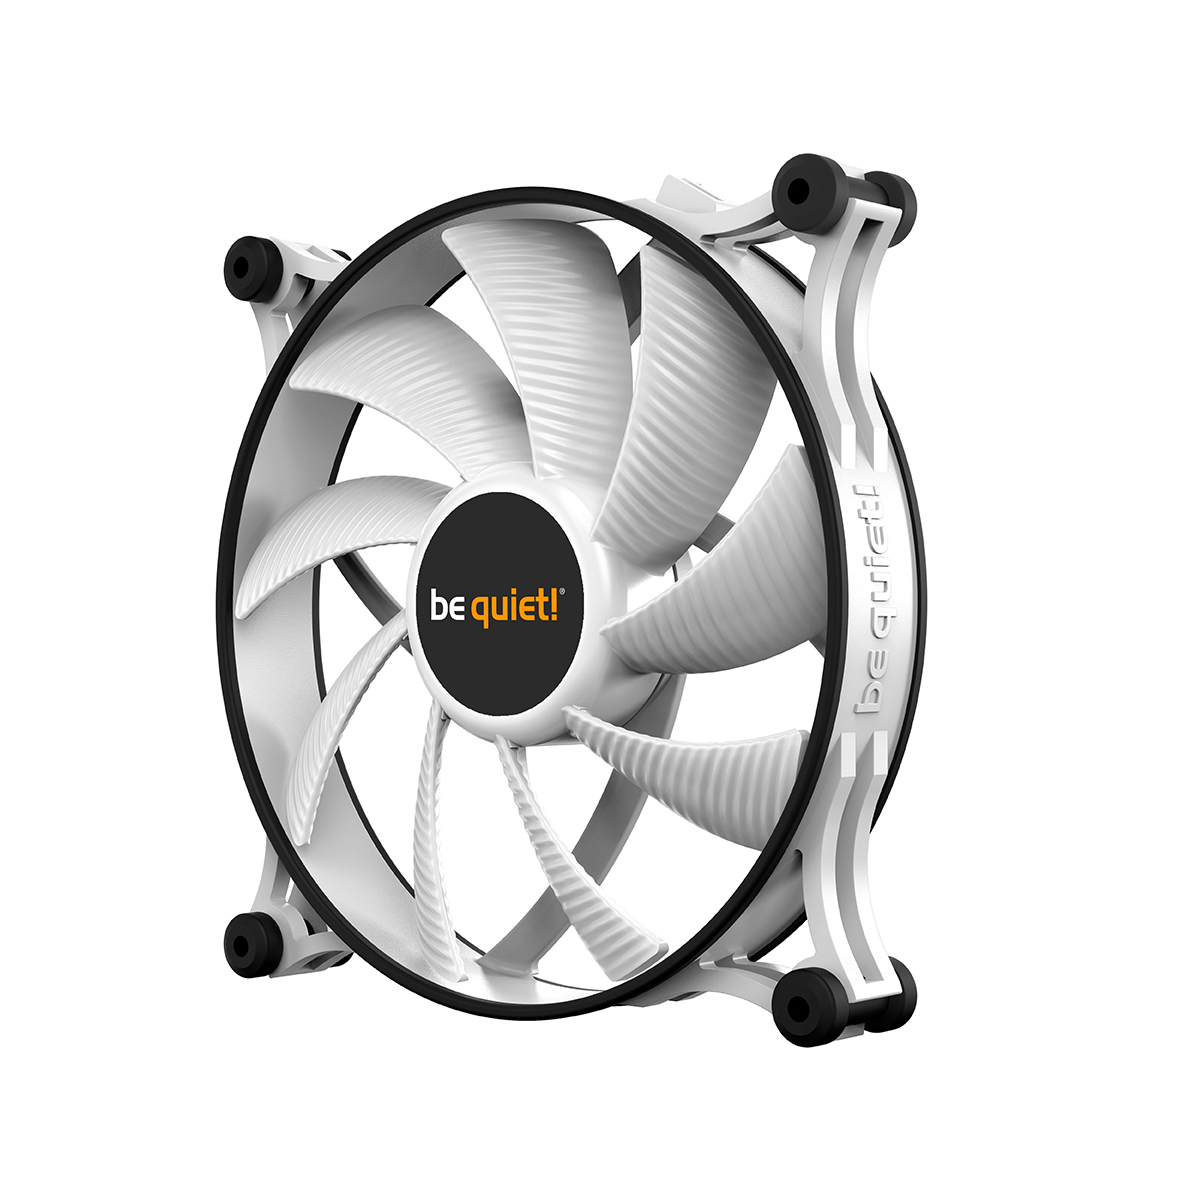 be quiet! - be quiet! Shadow Wings 2 140mm Fan - White